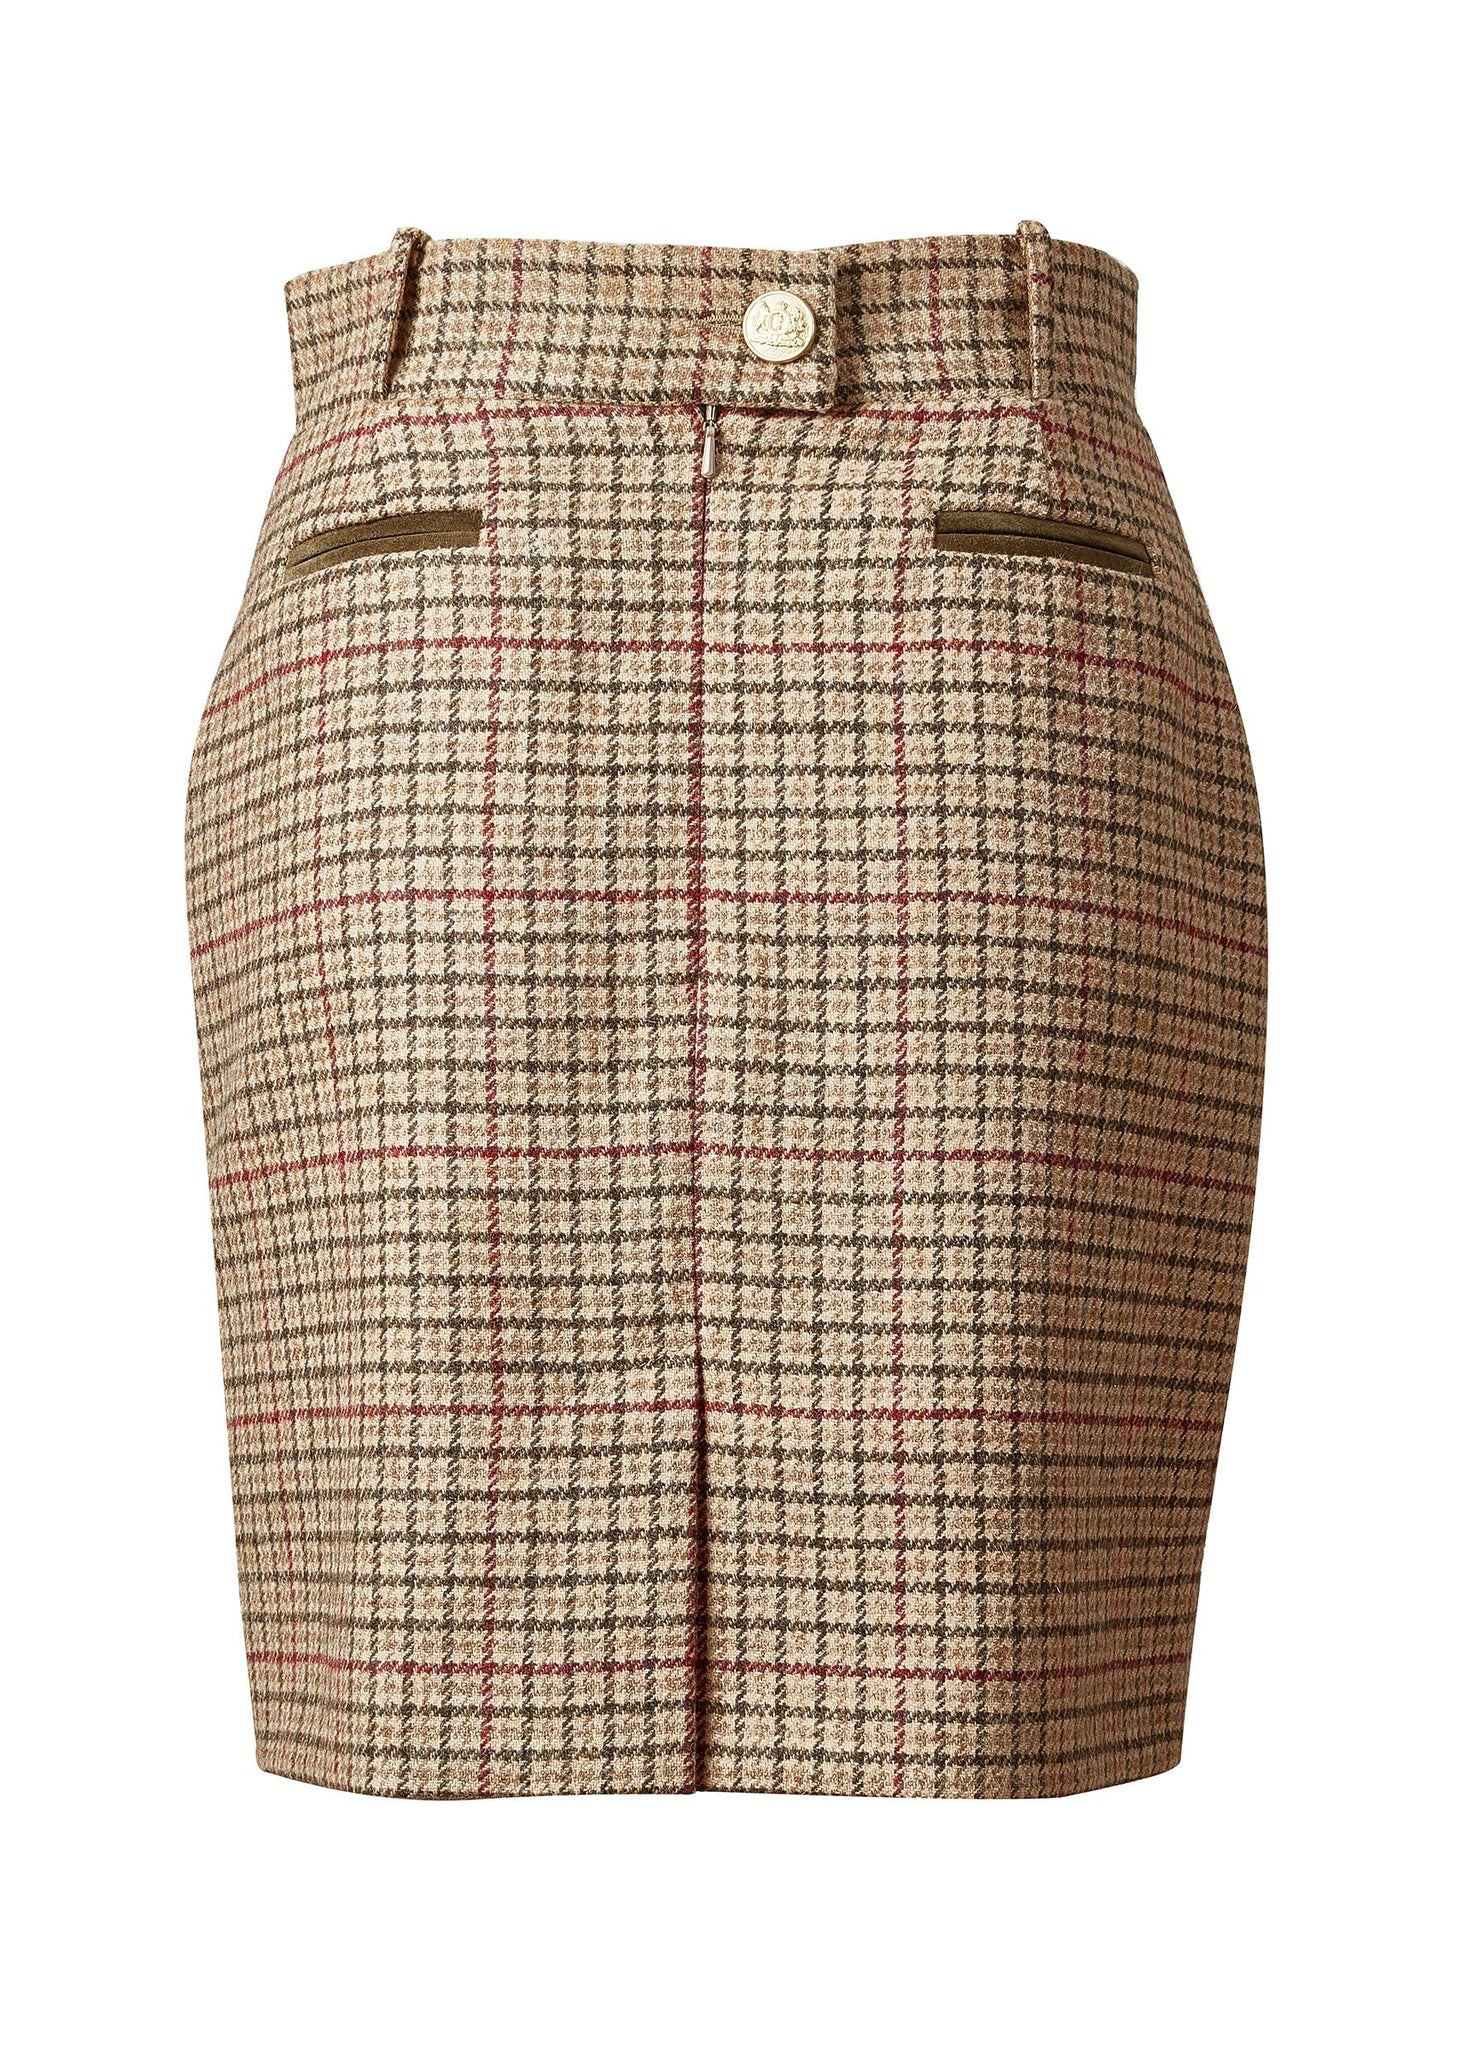 back of womens wool pencil mini skirt in light brown and red tweed check with concealed zip fastening on centre back and gold rivets down front